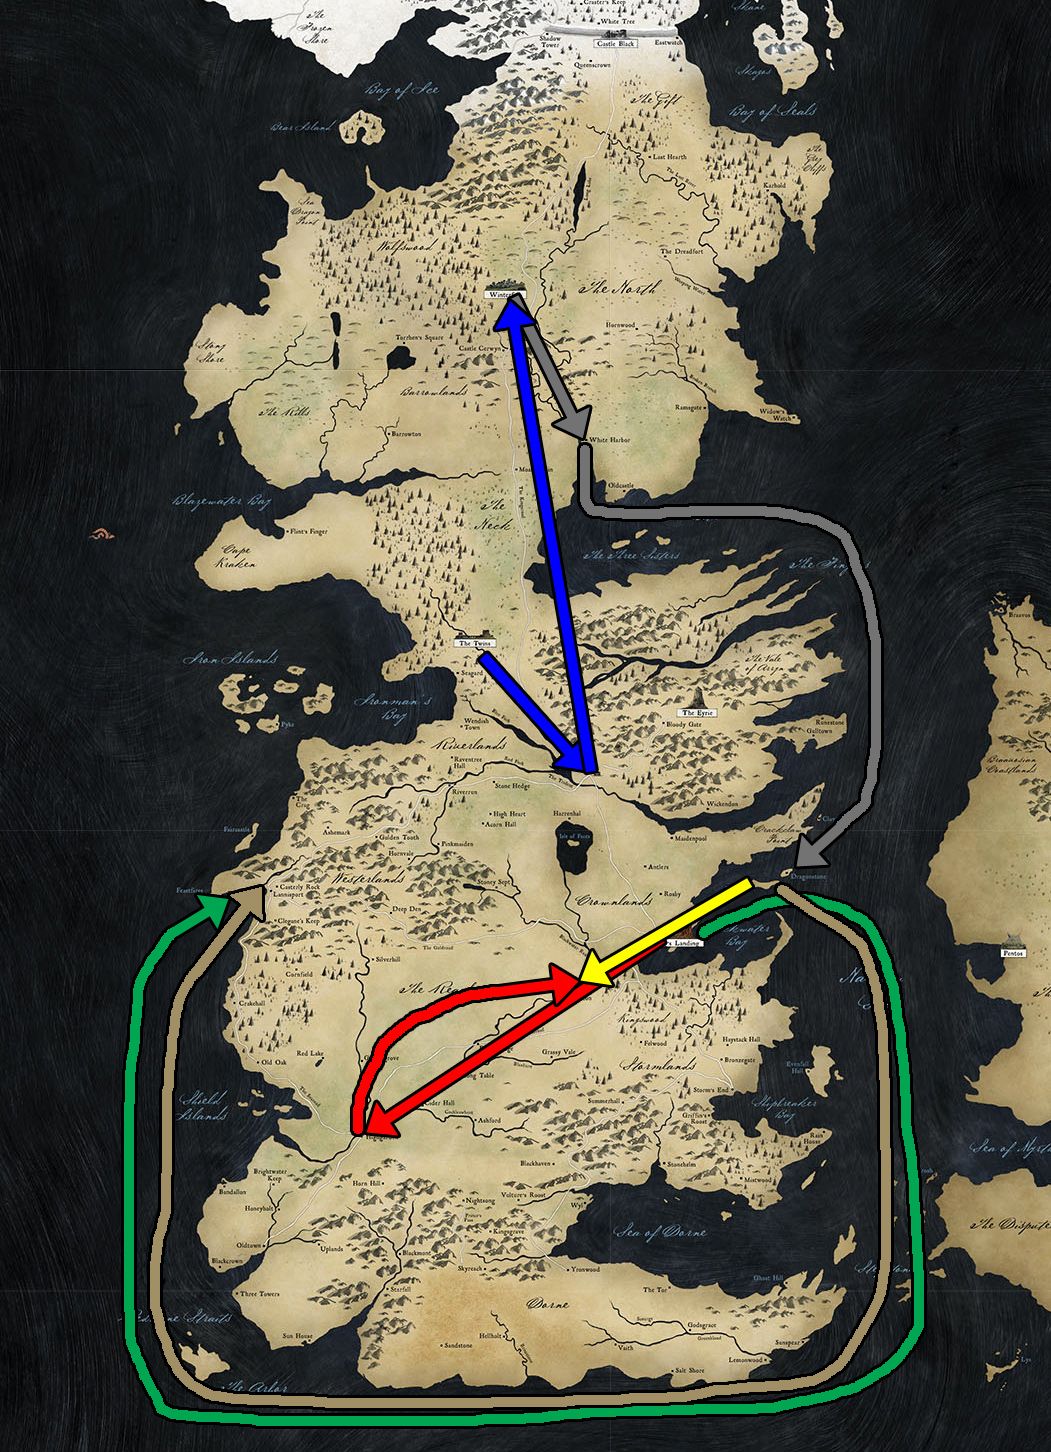 Game of Thrones Westeros Map With Season 7 Problems